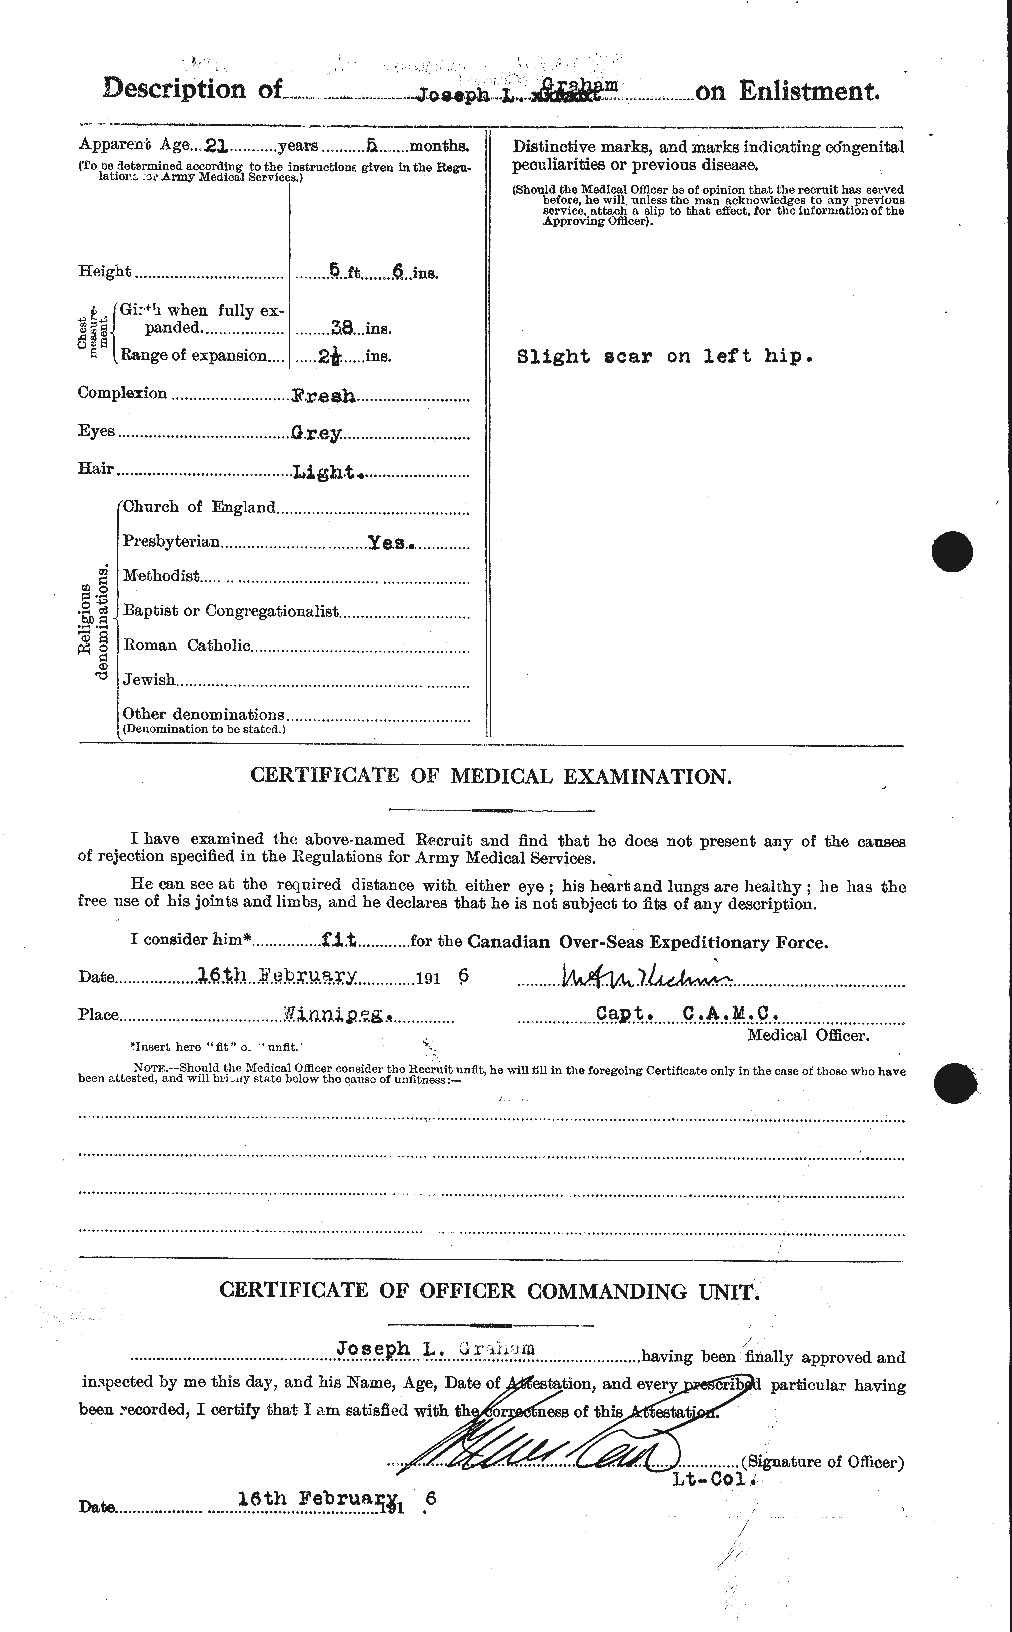 Personnel Records of the First World War - CEF 359251b